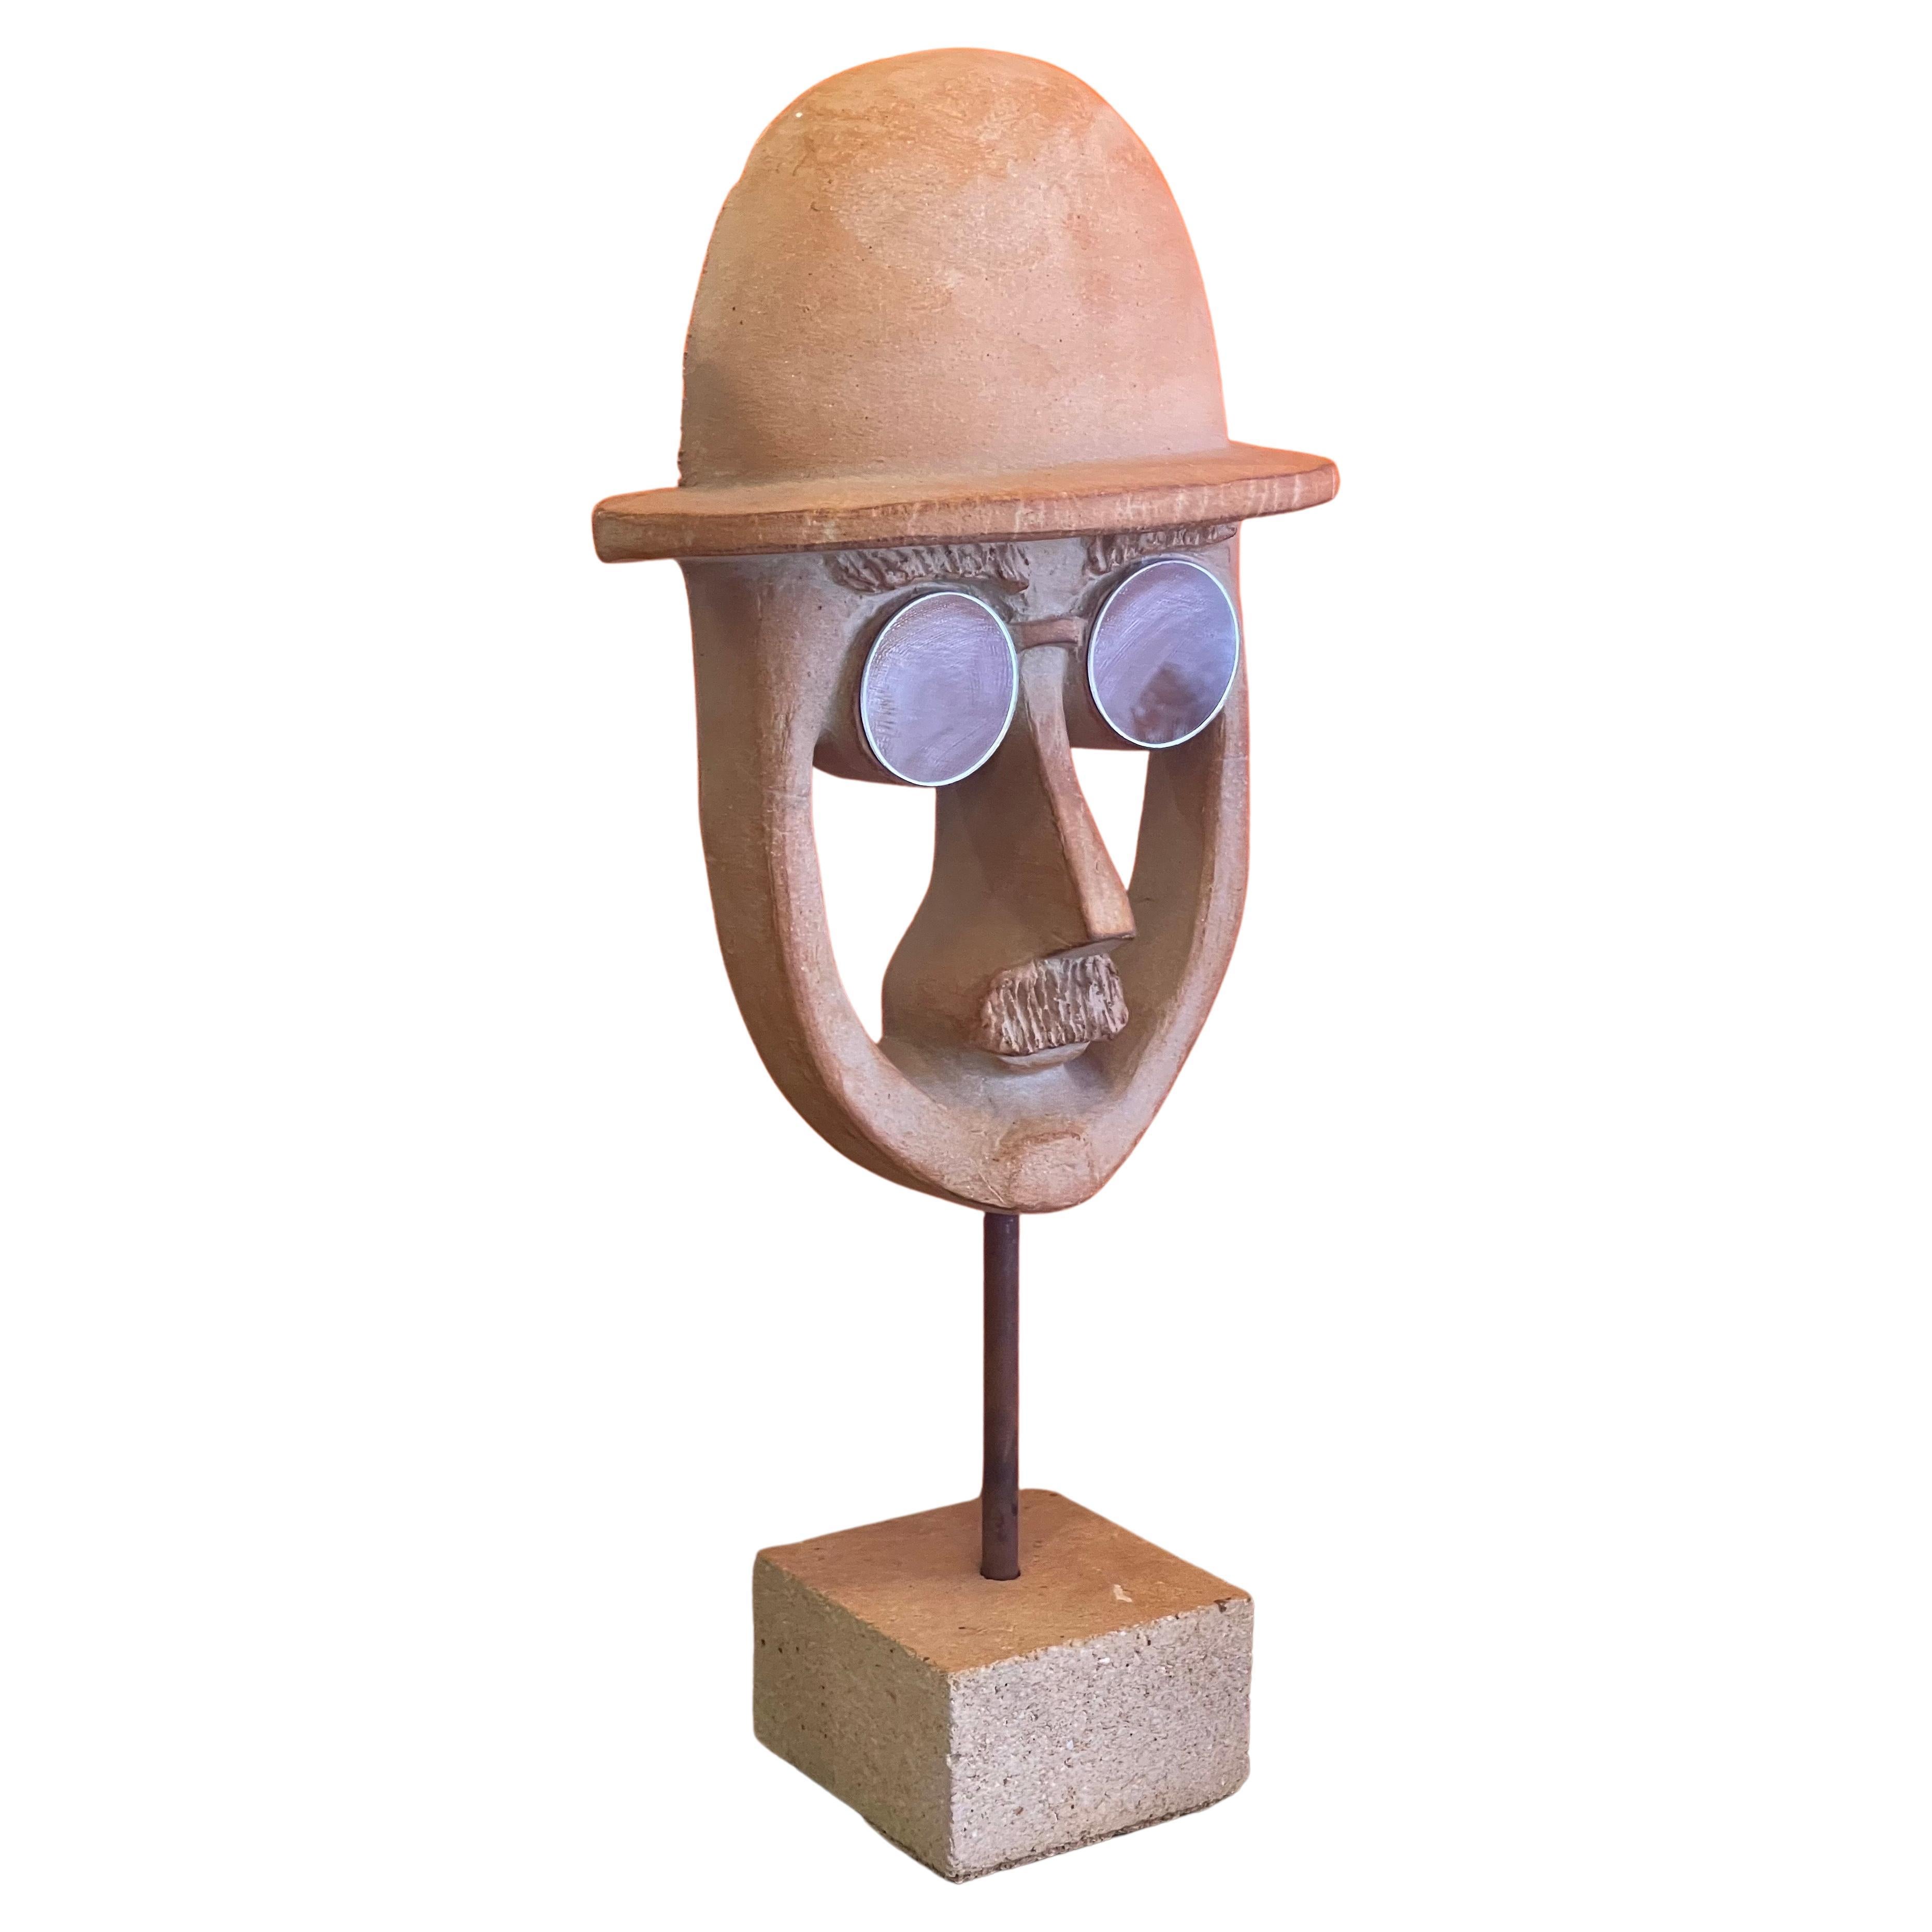 "Man with Bowler Hat" Stoneware Sculpture by David Gil for Bennington Pottery